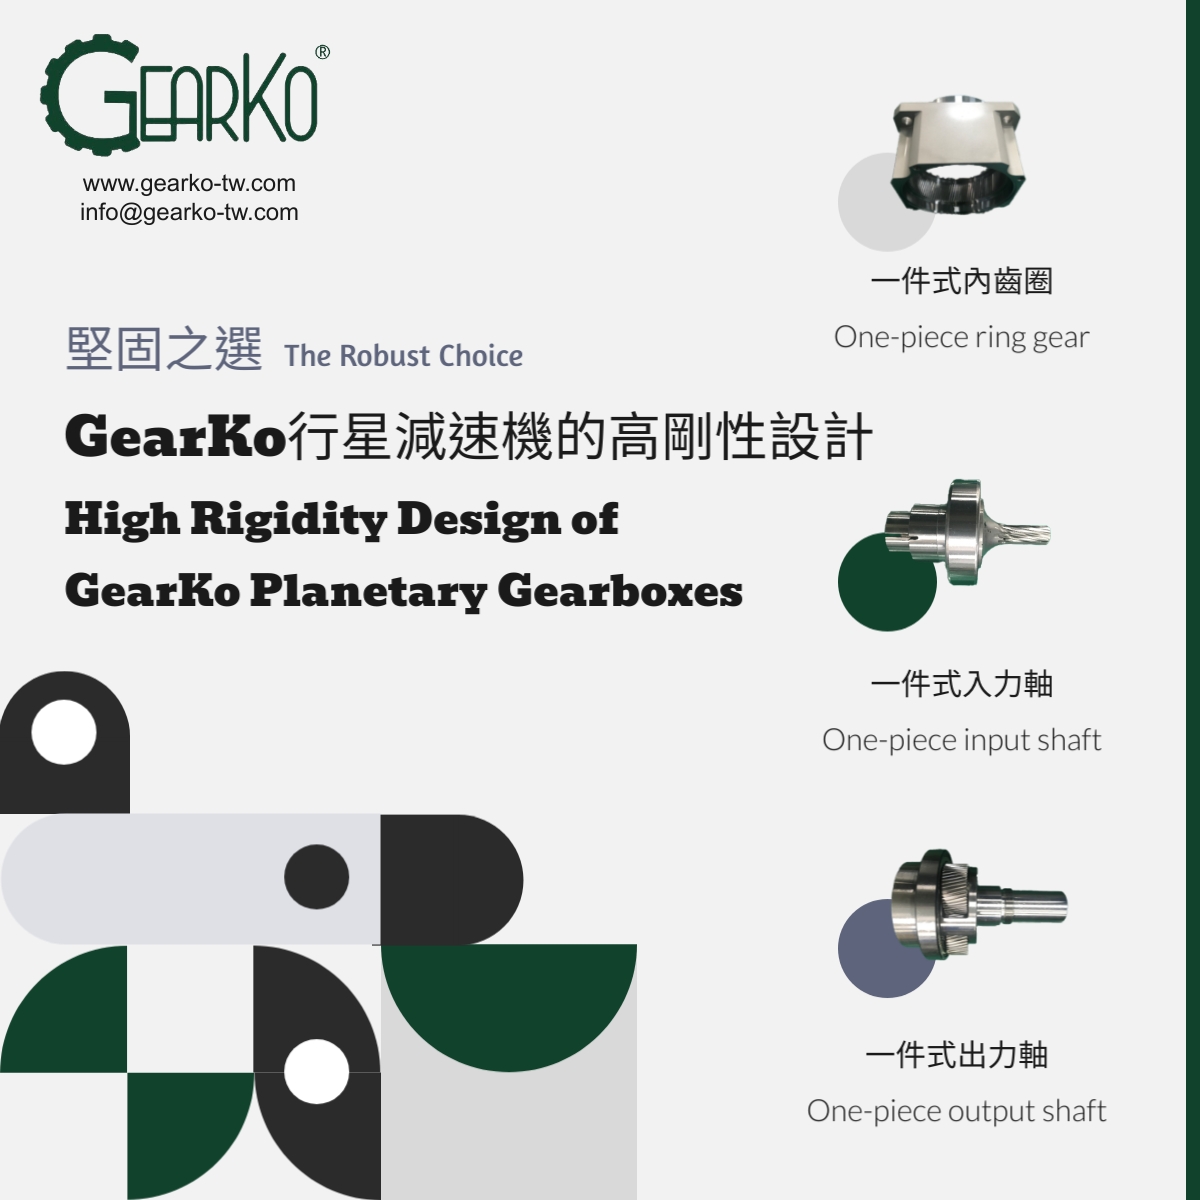 The Robust Choice: High Rigidity Design of GearKo Planetary Gearboxes